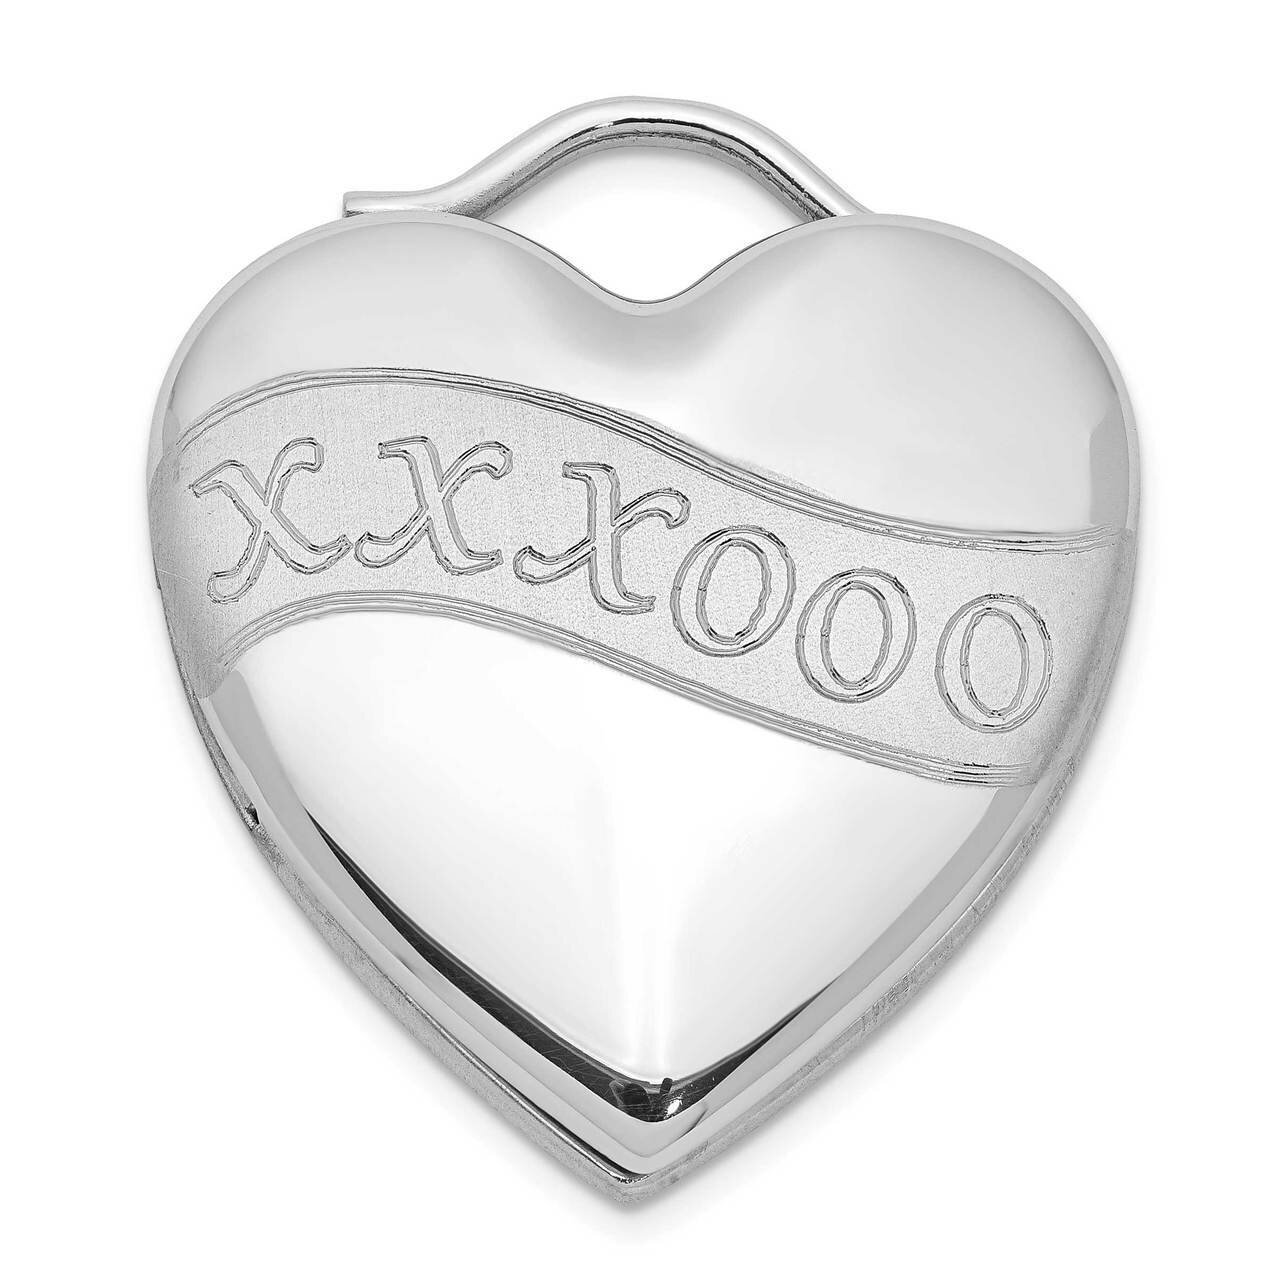 Brushed & Polished XXXOOO Heart Locket Sterling Silver Rhodium-plated QLS998